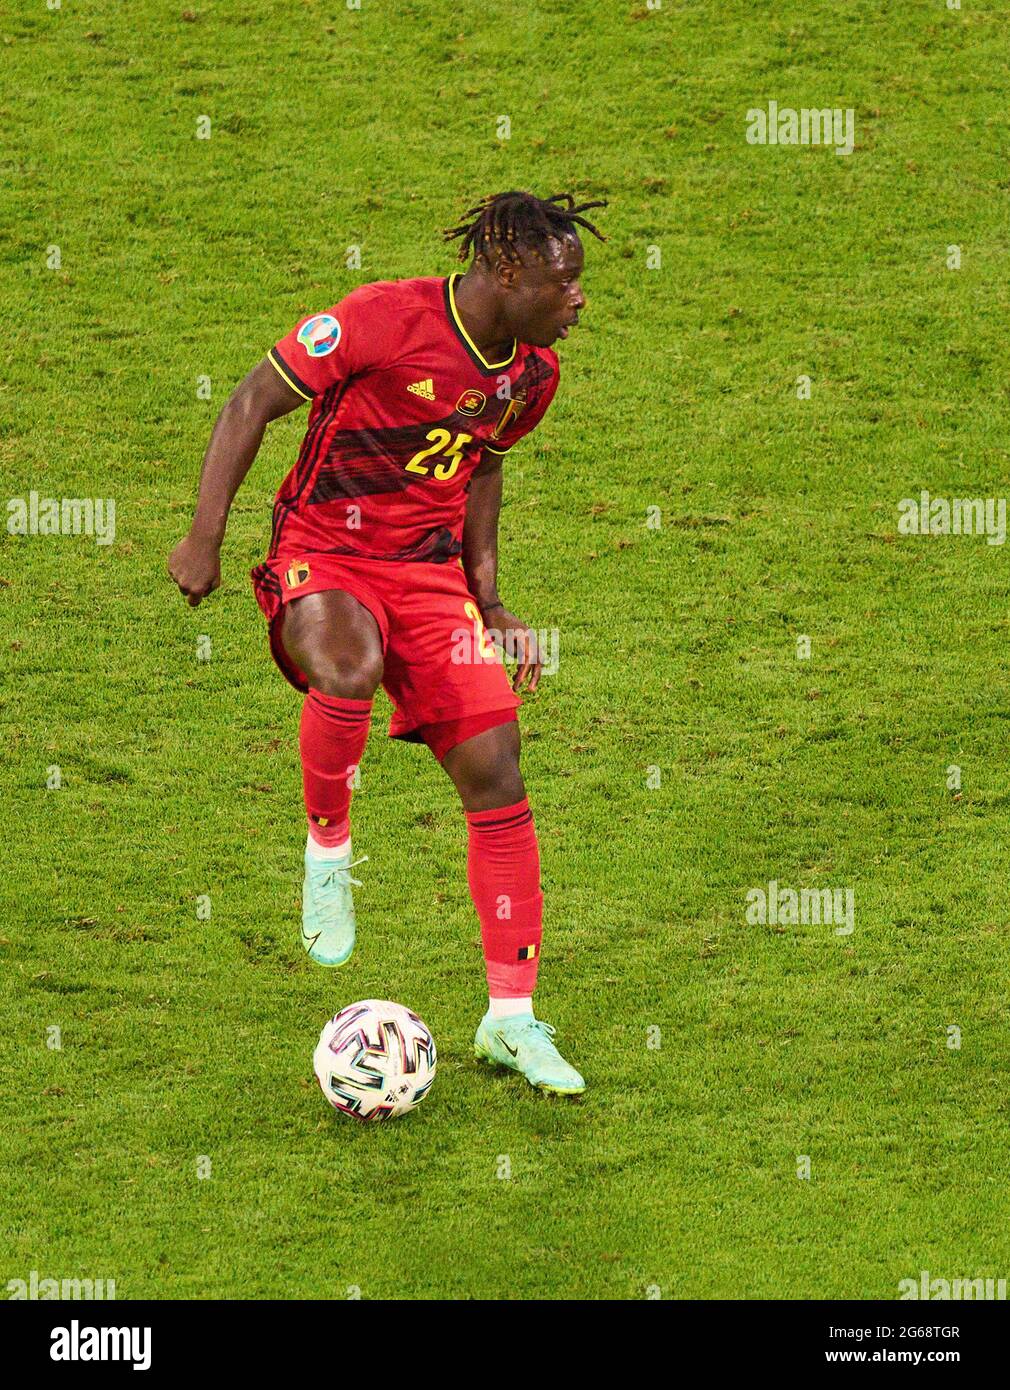 Jeremy Doku, Belgium Nr.25  in the quarterfinal match BELGIUM - ITALY 1-2 at the football UEFA European Championships 2020 in Season 2020/2021 on July 02, 2021  in Munich, Germany. © Peter Schatz / Alamy Live News Stock Photo